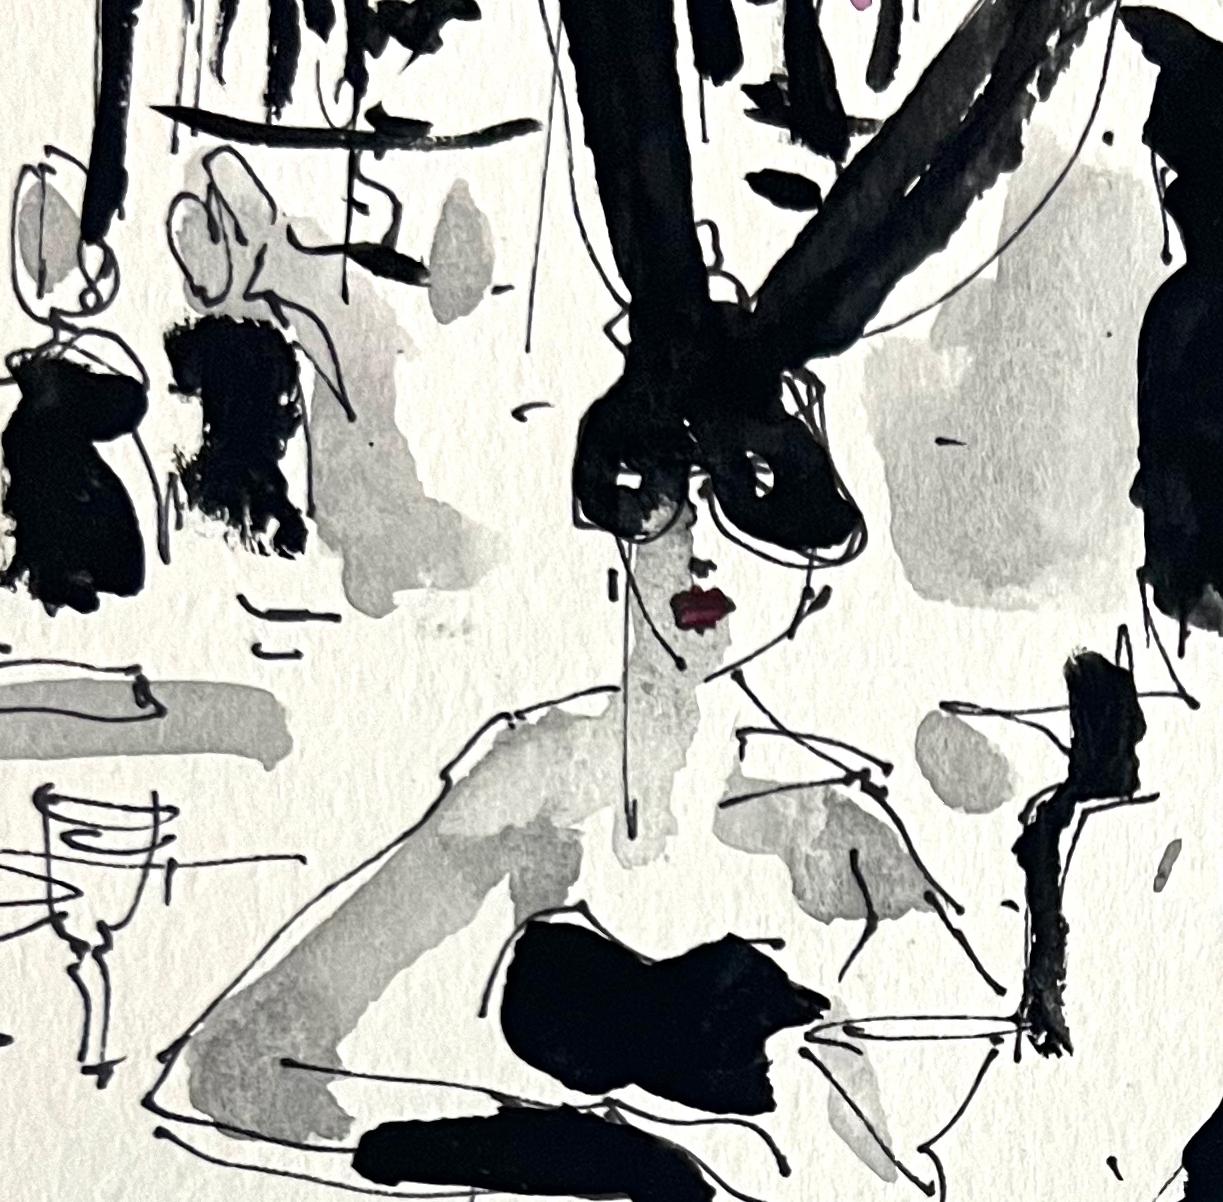 Elsa Peretti goes out for a drink. From the Art, culture & society series For Sale 1